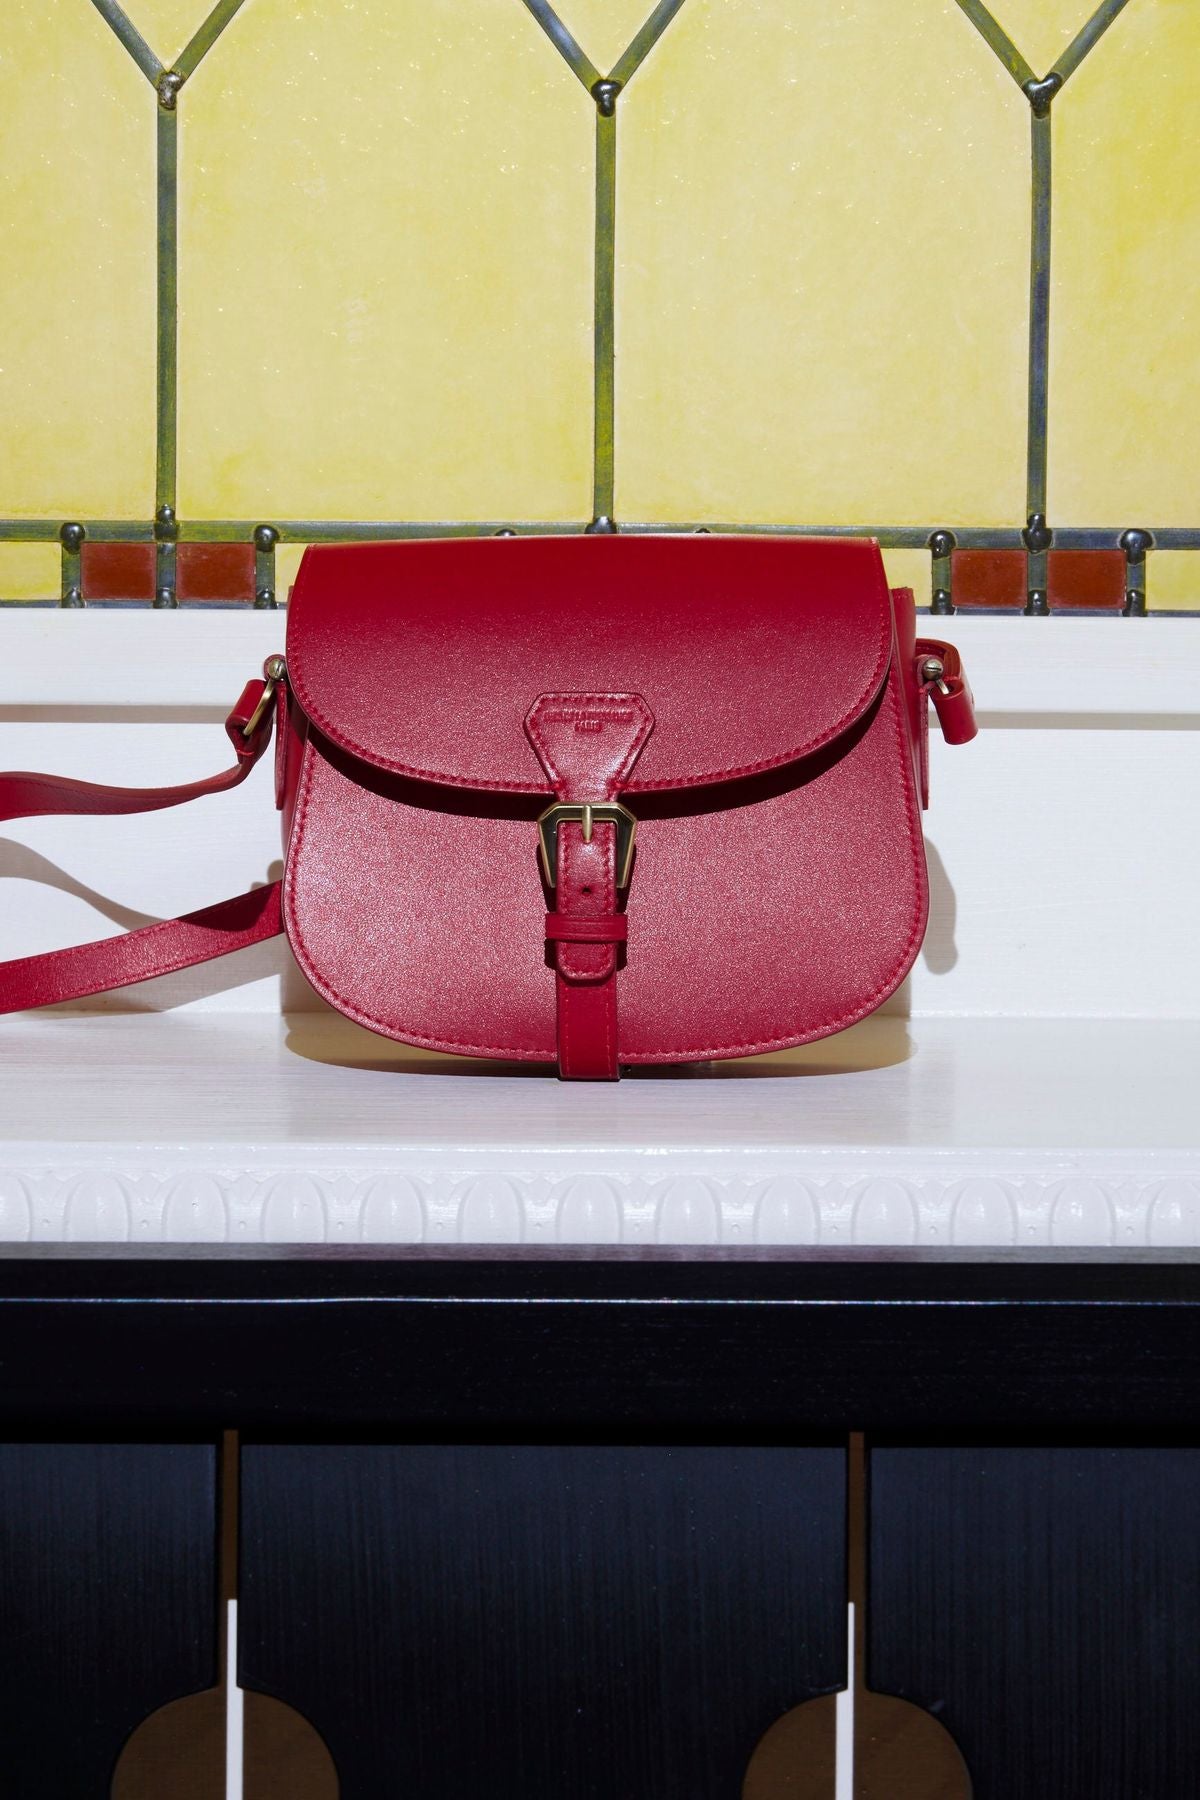 bag-baby-flaneur-leather-red